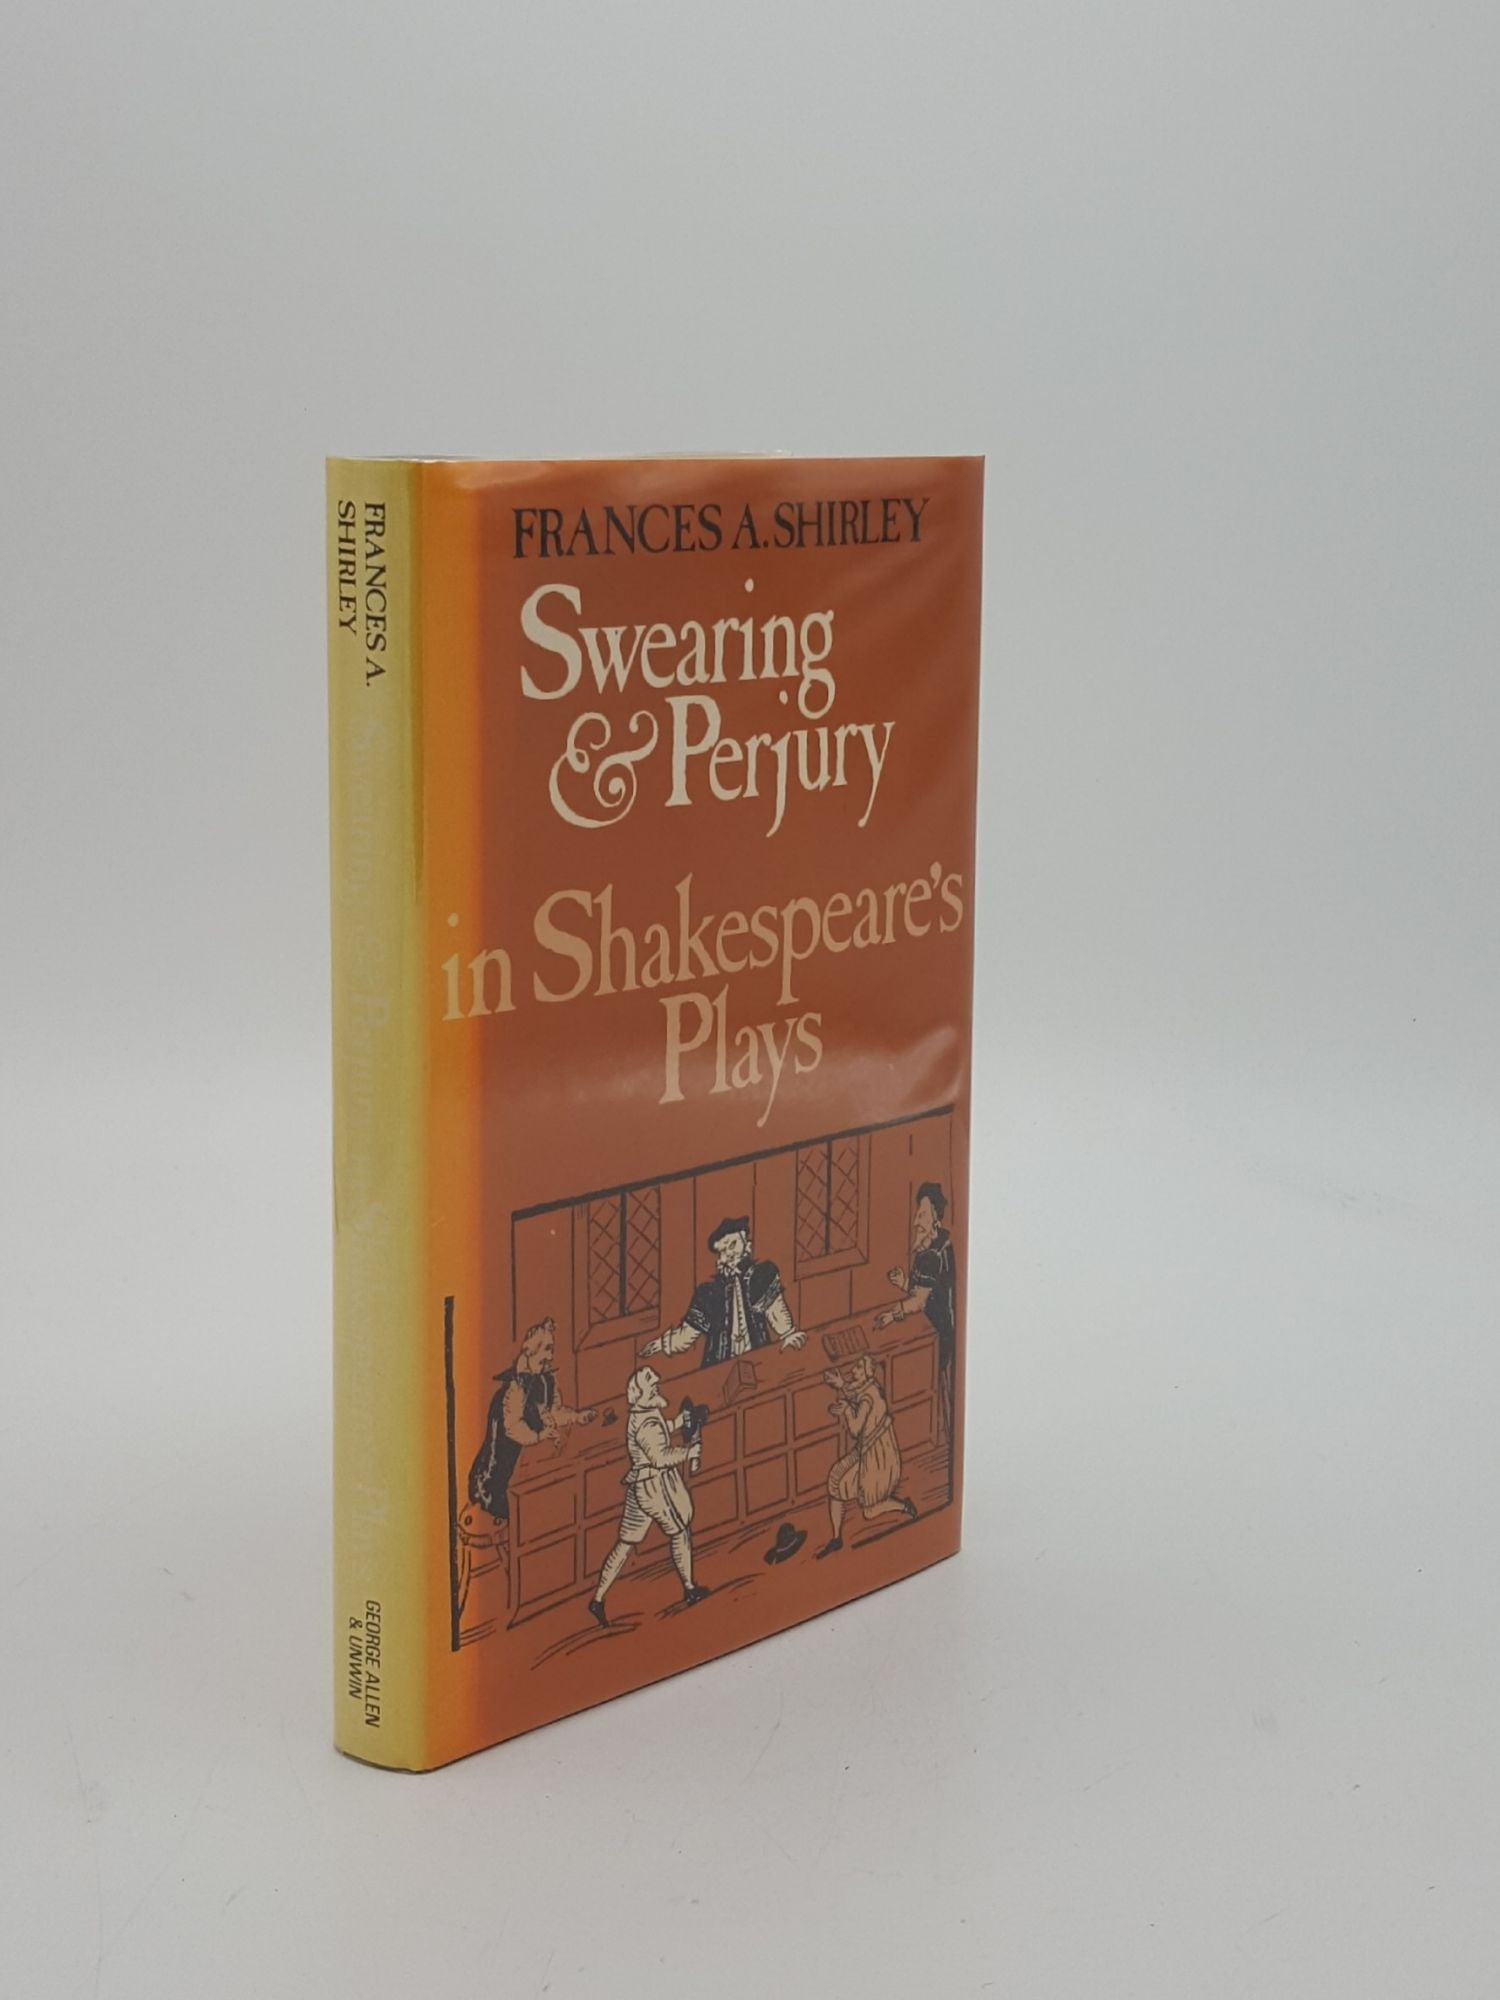 SHIRLEY Frances A. - Swearing and Perjury in Shakespeare's Plays